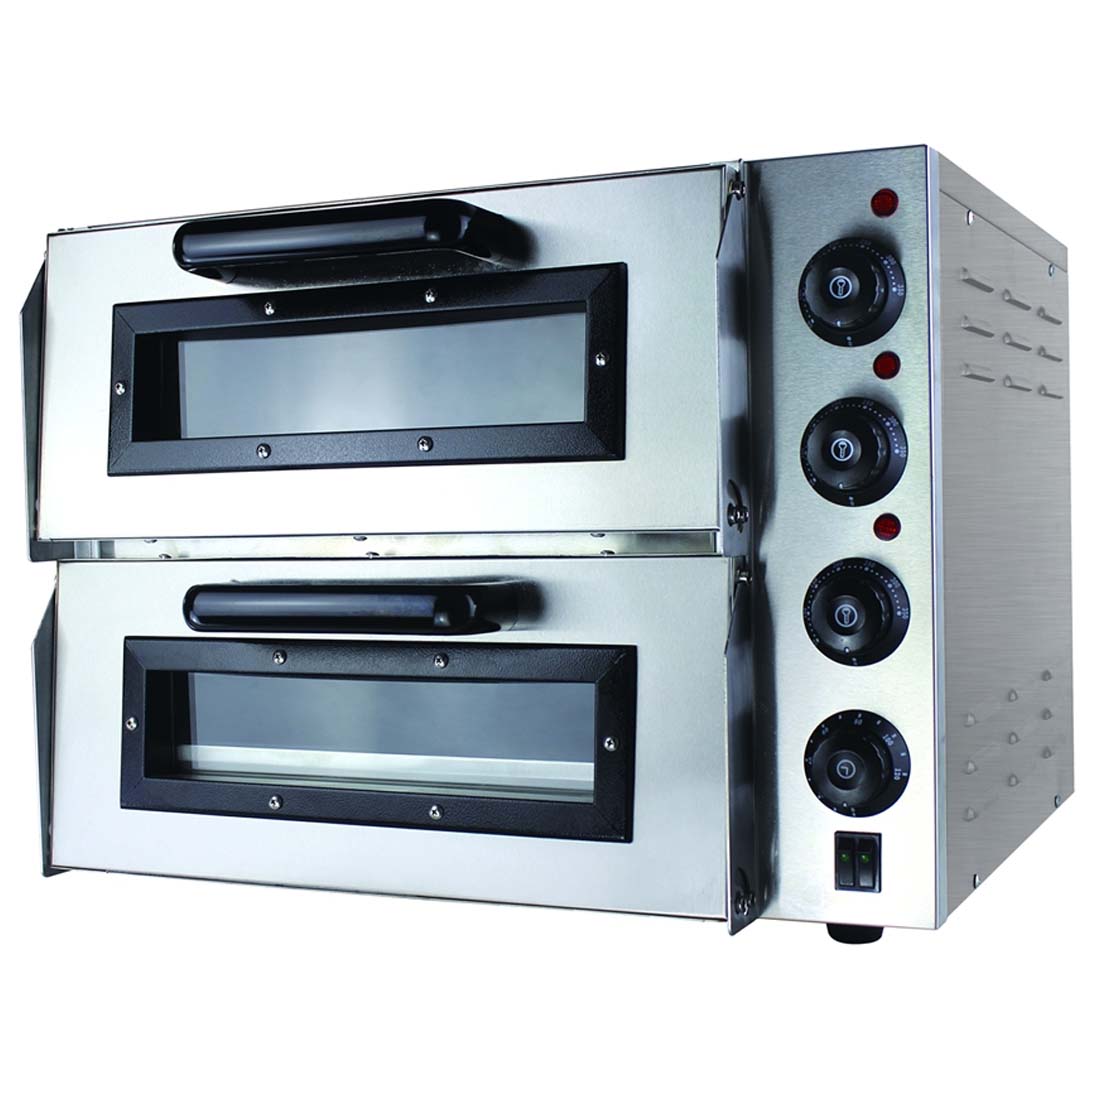 EP2S/15 Compact Double Pizza Deck Oven